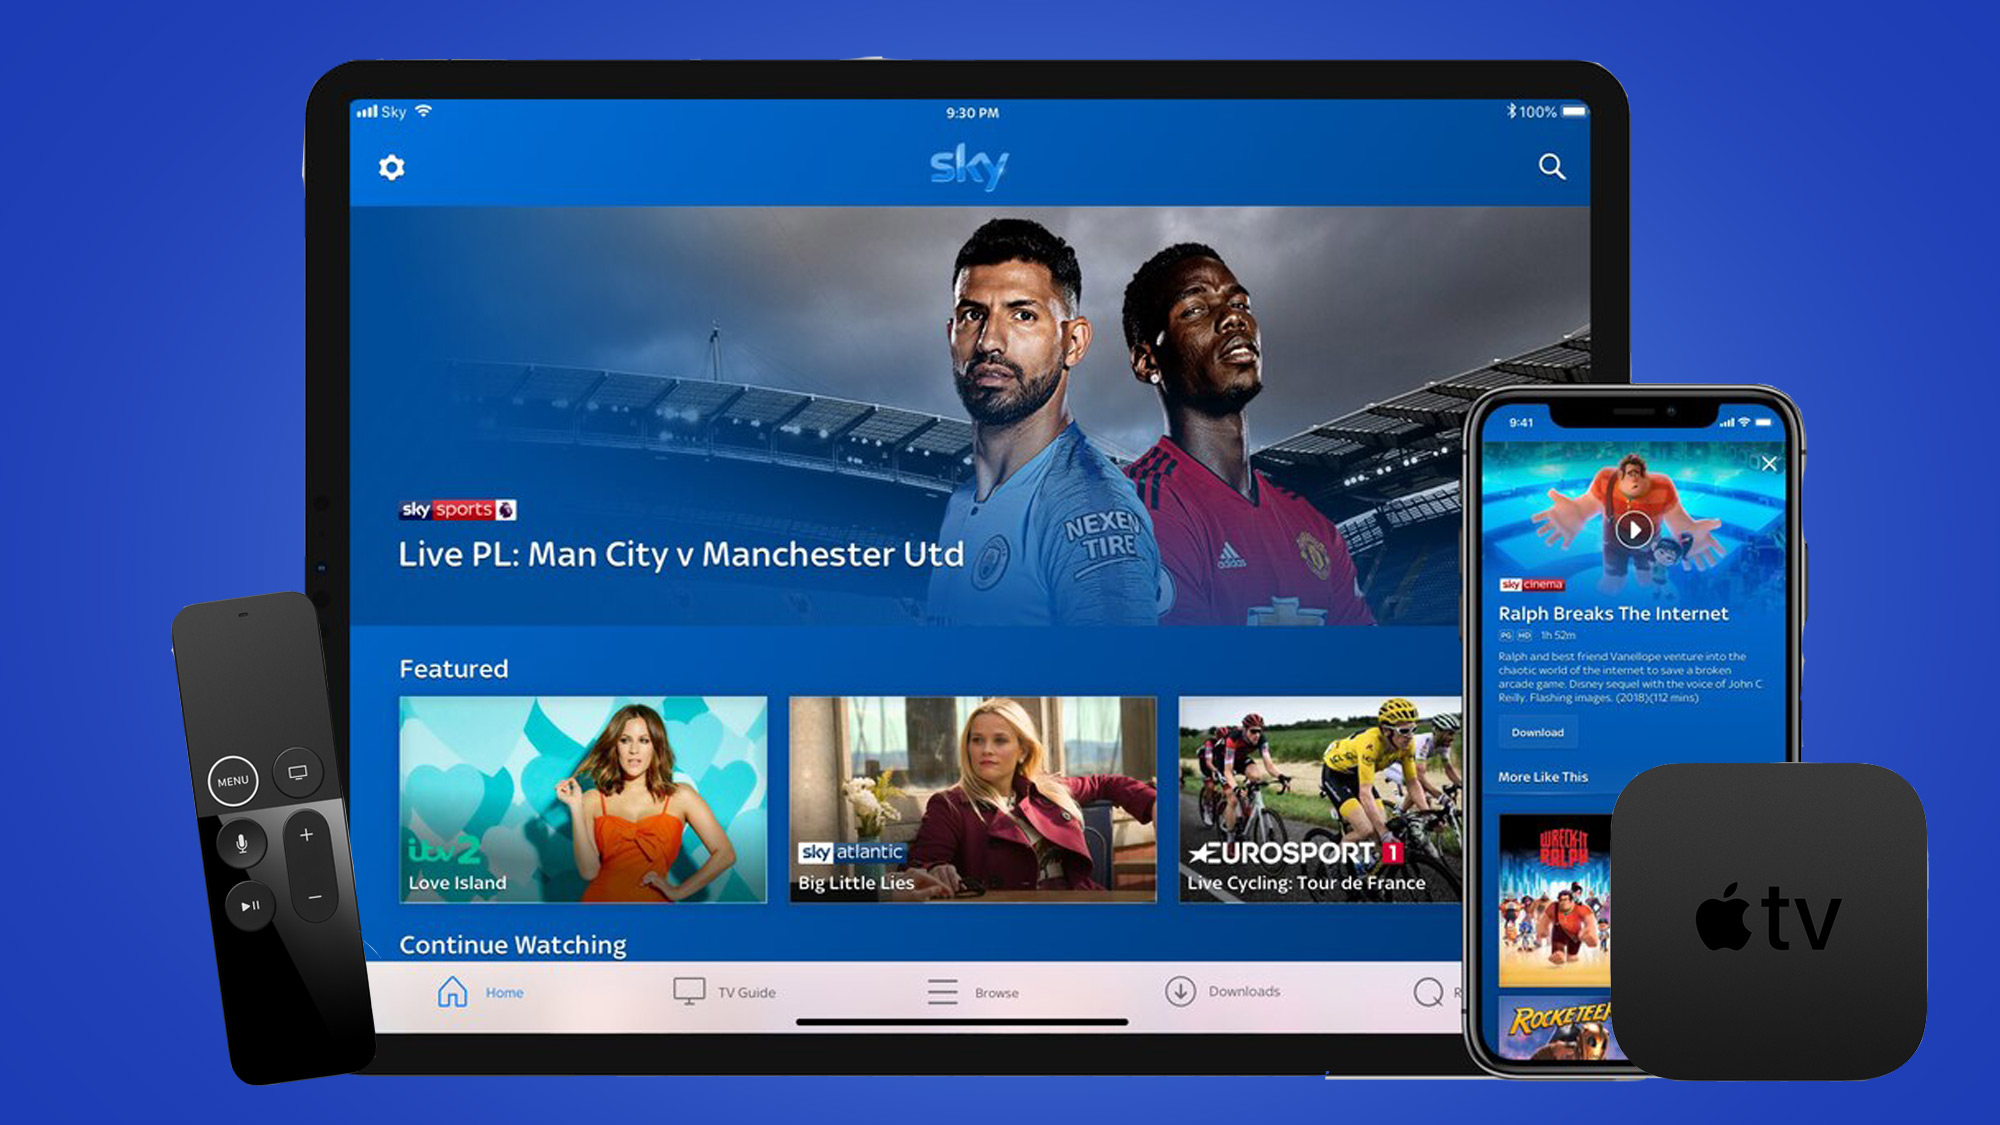 Sky Go On Apple Tv How To Watch, Can I Mirror Skygo From Ipad To Tv